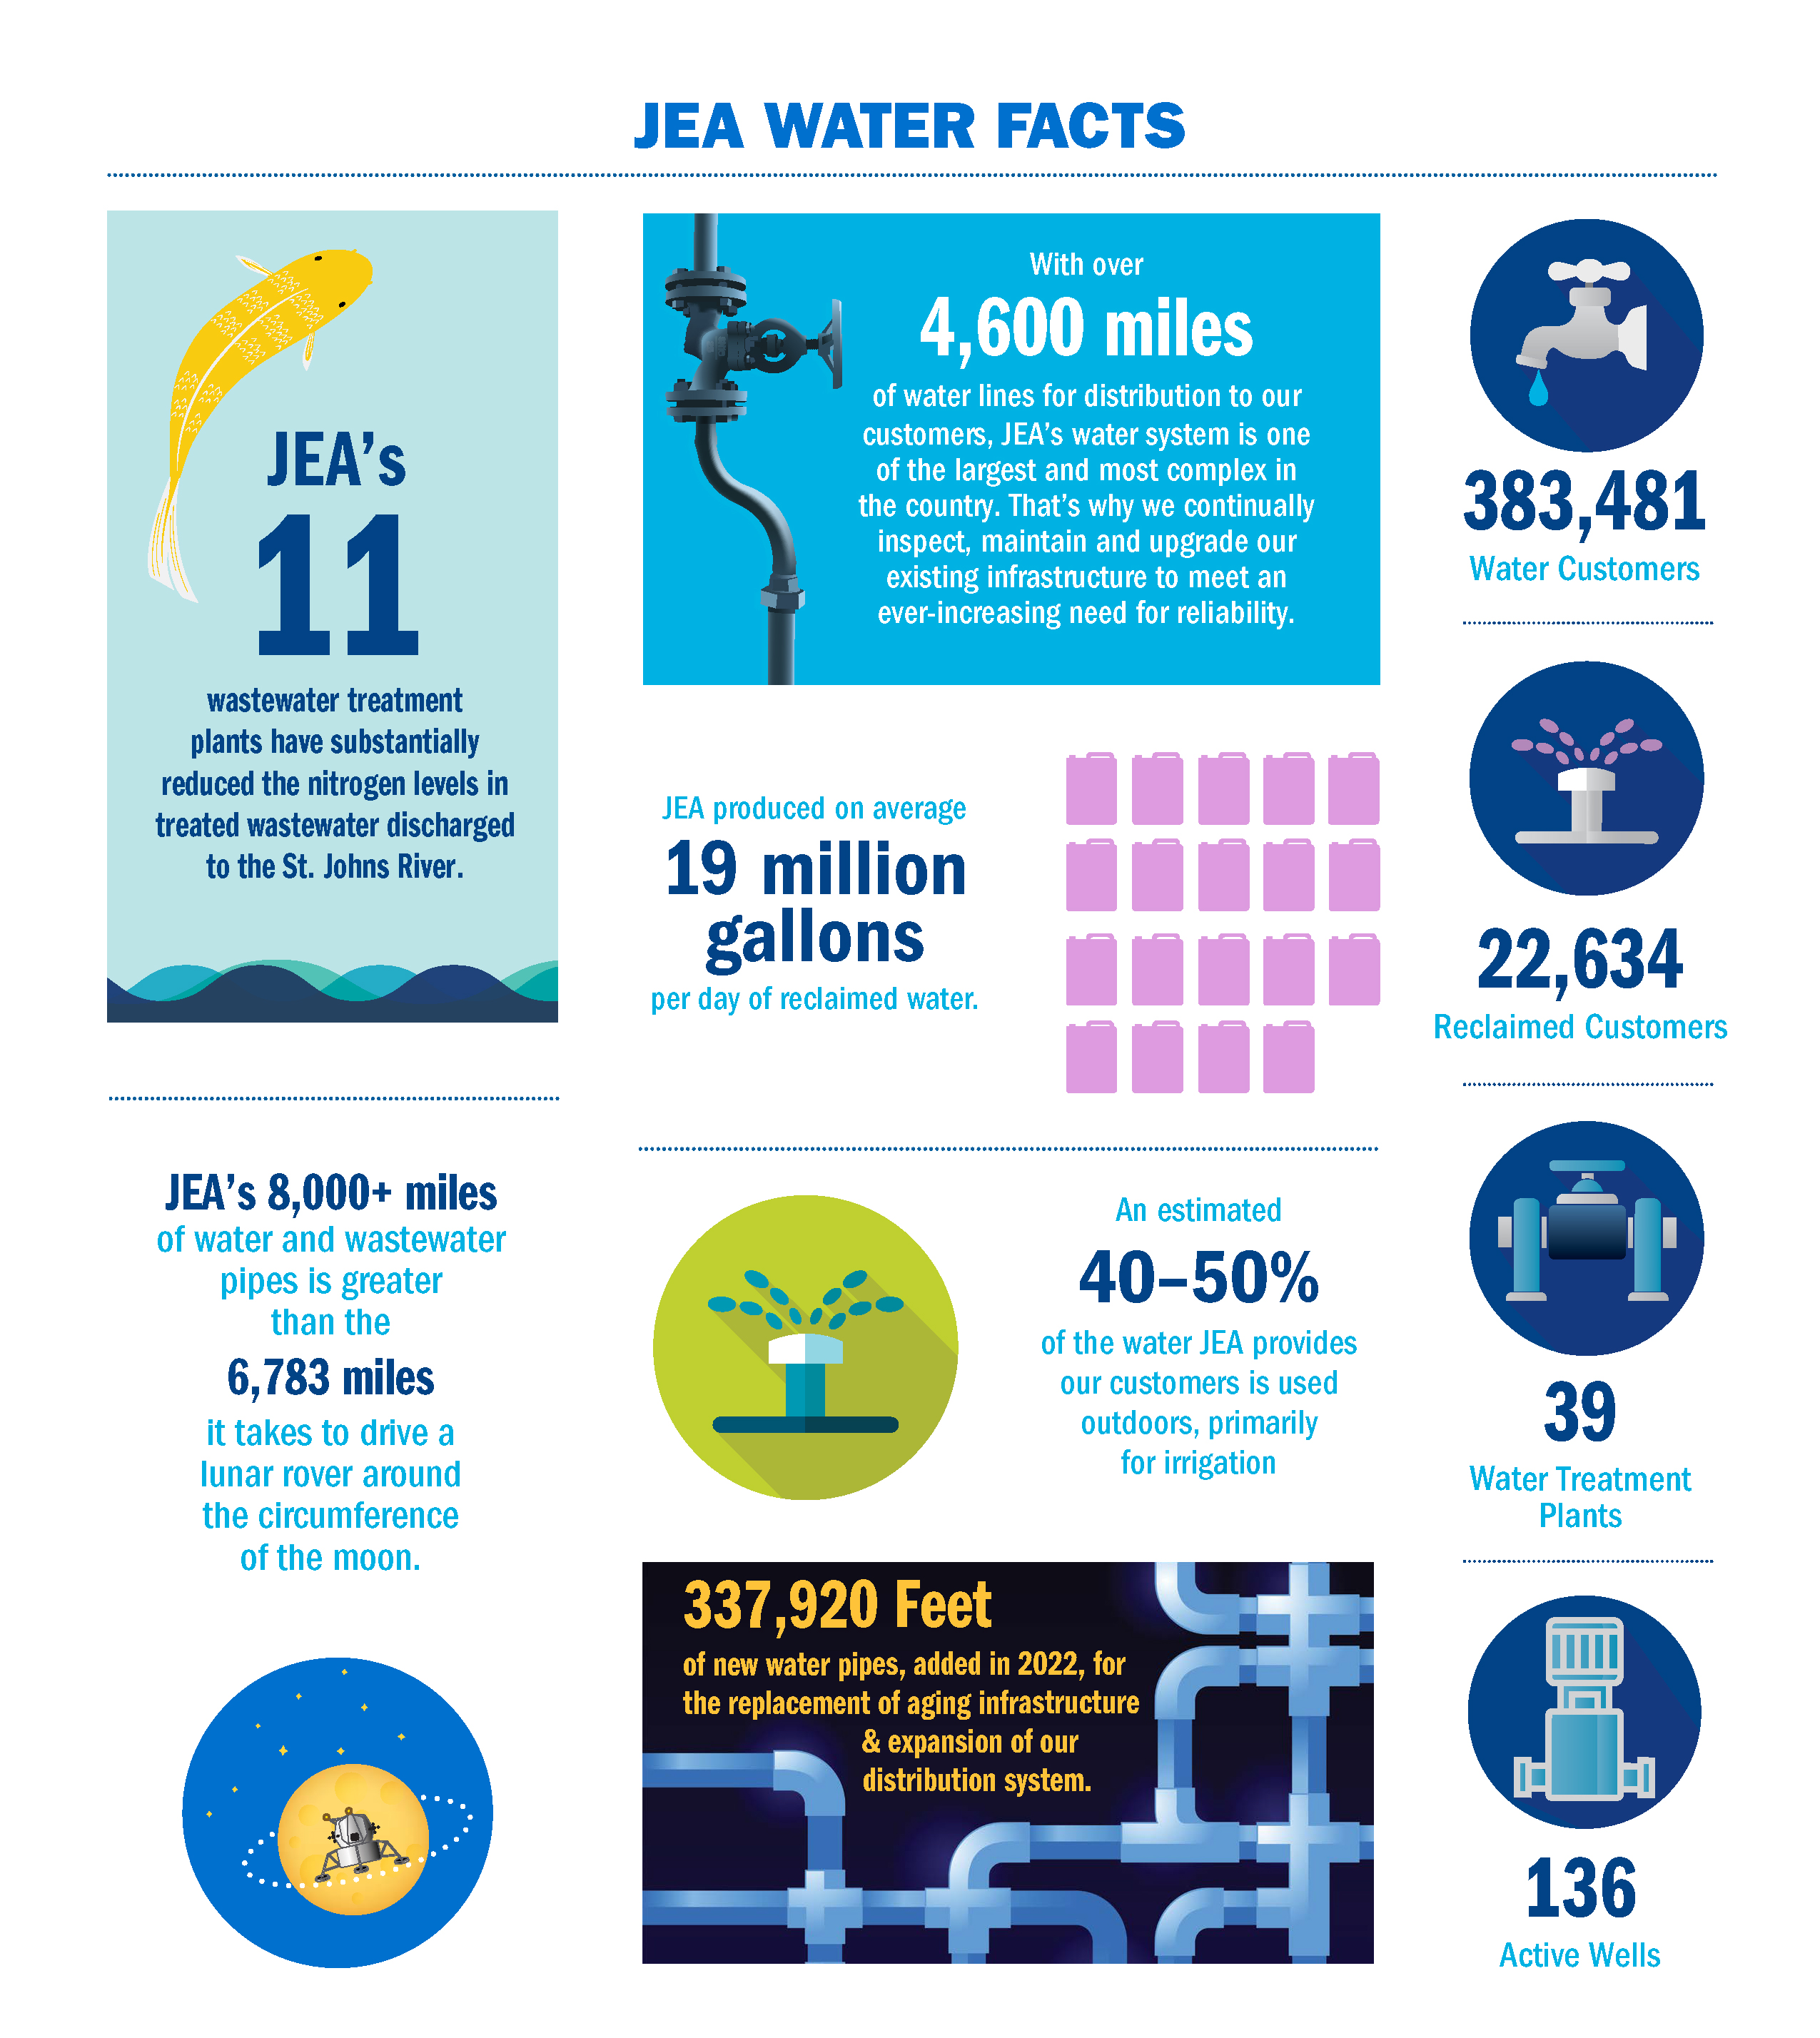 JEA Water Facts